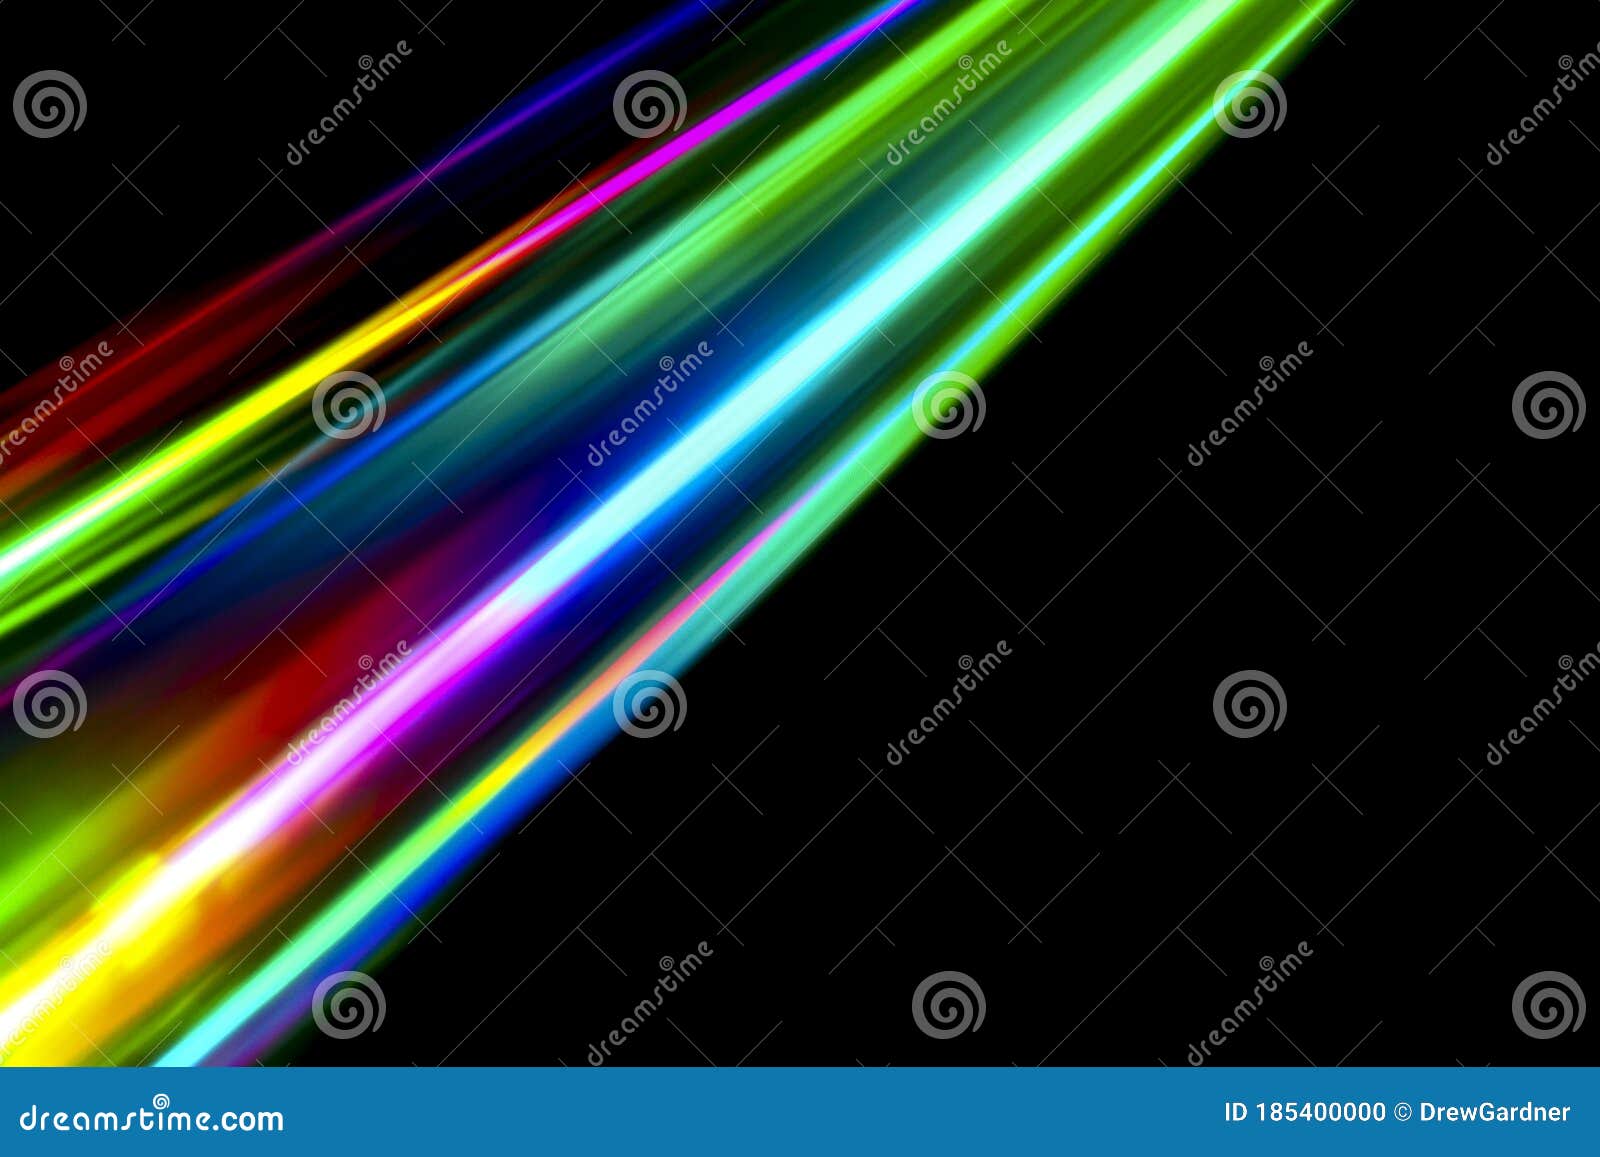 Beams of Light Refracting and Creating a Rainbow Stock Photo - Image refracting, tech: 185400000